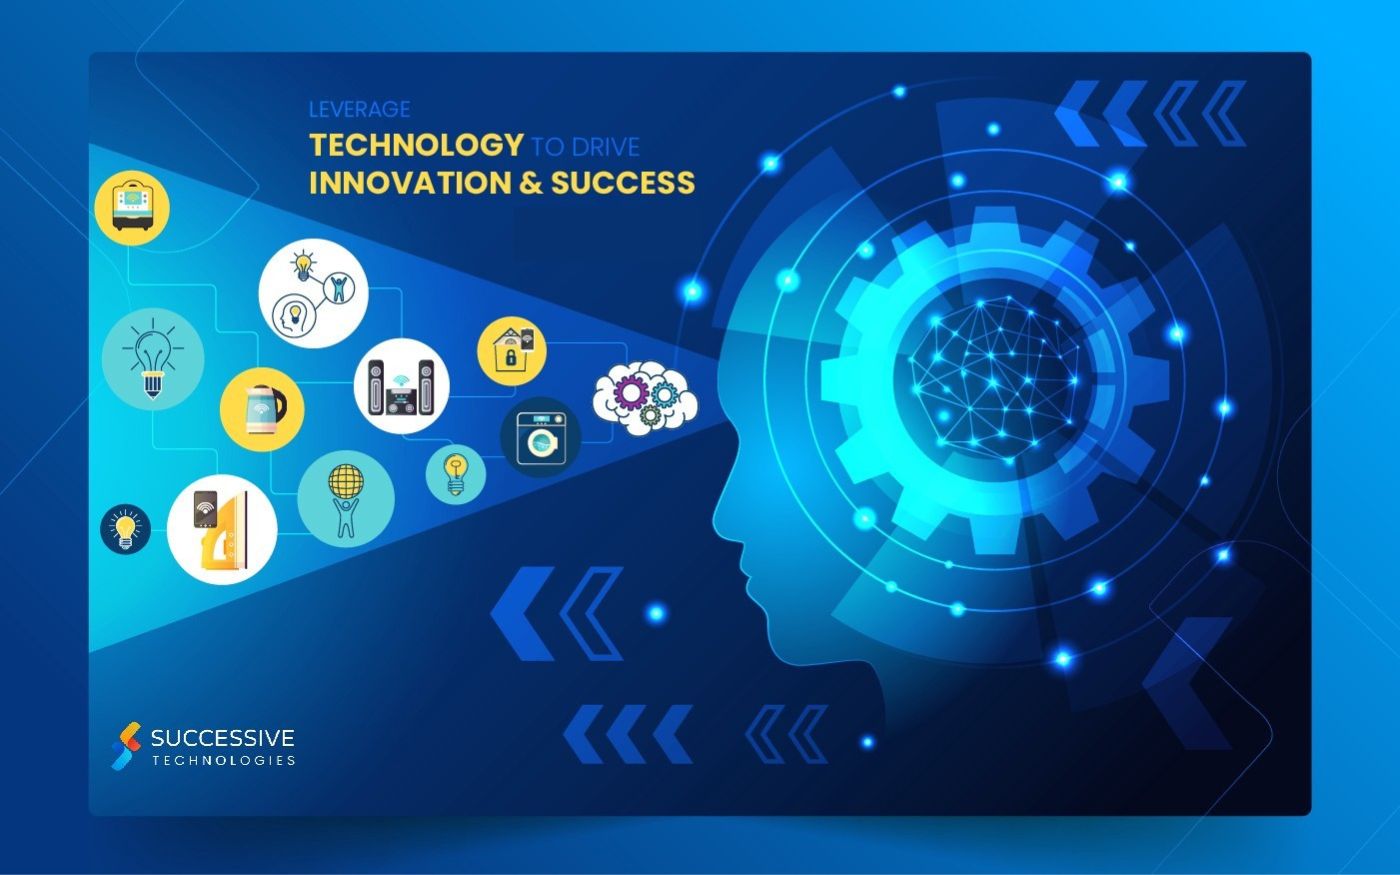 Future-Proof: Leverage Technology To Drive Innovation And Success